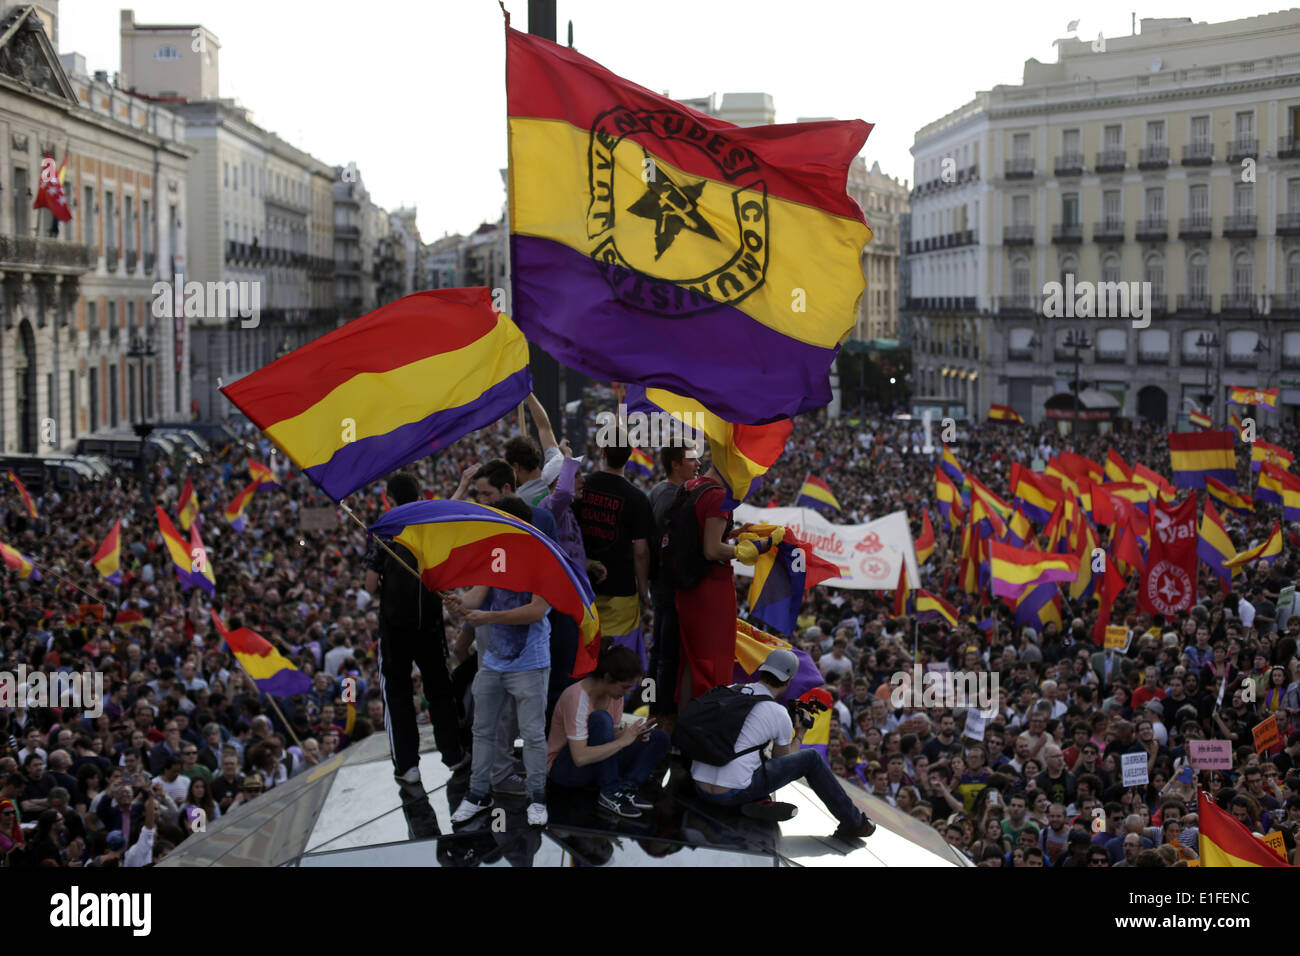 Madrid, Spain. 2nd June, 2014. Protestors wave republican flags and shout slogans as crowds of people gather in the main square of Madrid, Spain, Monday, June 2, 2014 after the announcement of the abdication of Spain's King Juan Carlos. King Juan Carlos plans to abdicate and pave the way for his son, Crown Prince Felipe, to become the country's next king. The 76-year-old Juan Carlos oversaw his country's transition from dictatorship to democracy but has had repeated health problems in recent years. Credit:  ZUMA Press, Inc./Alamy Live News Stock Photo